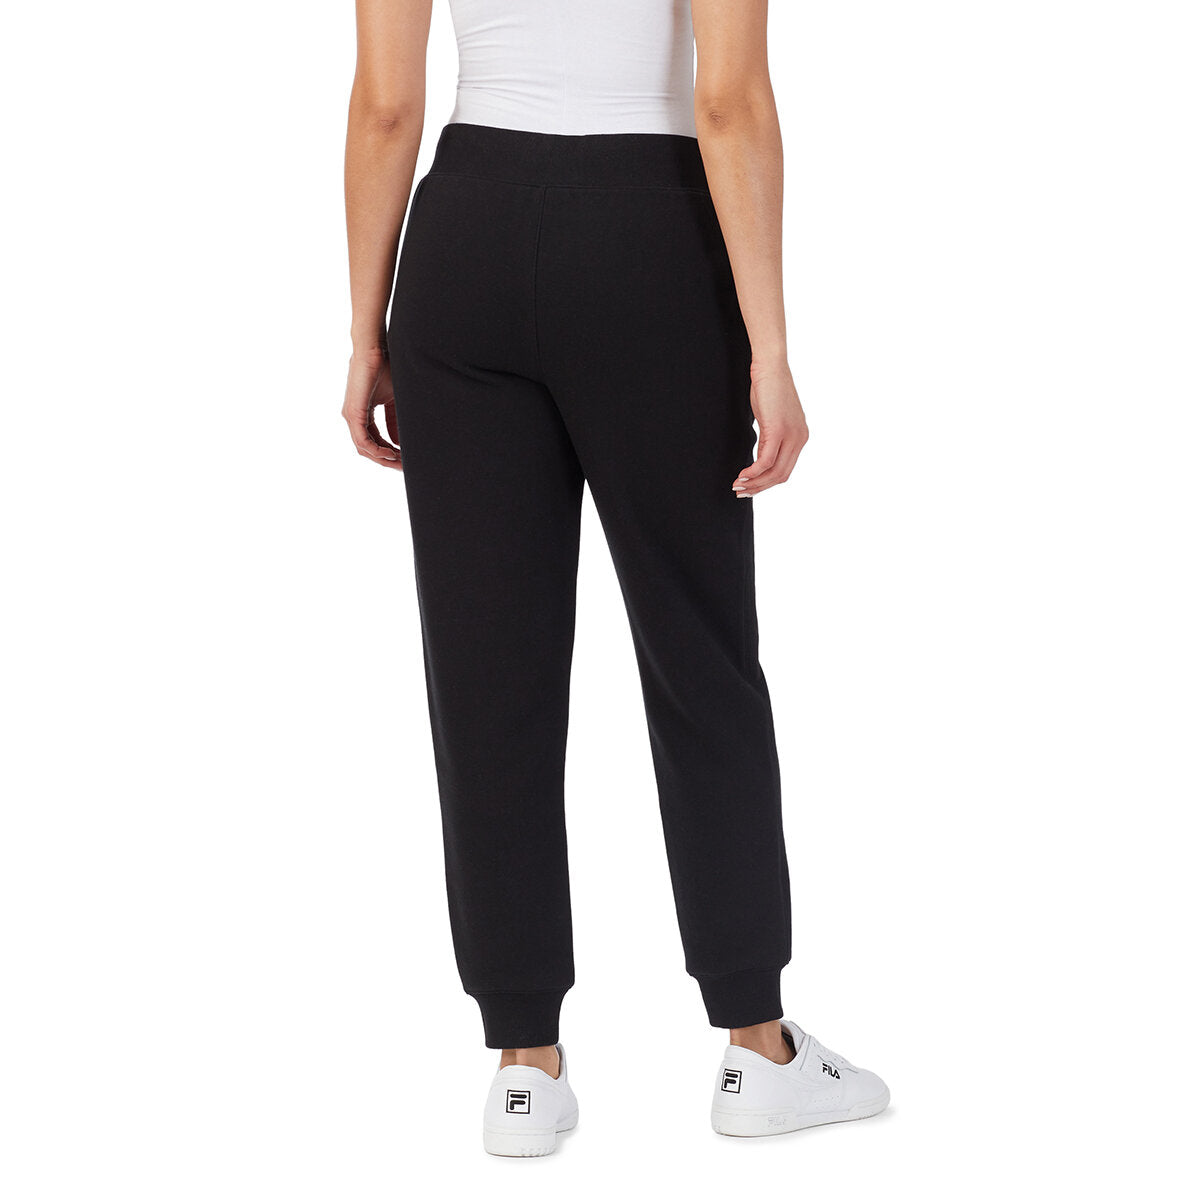 Comfortable and warm sports pants from Fila